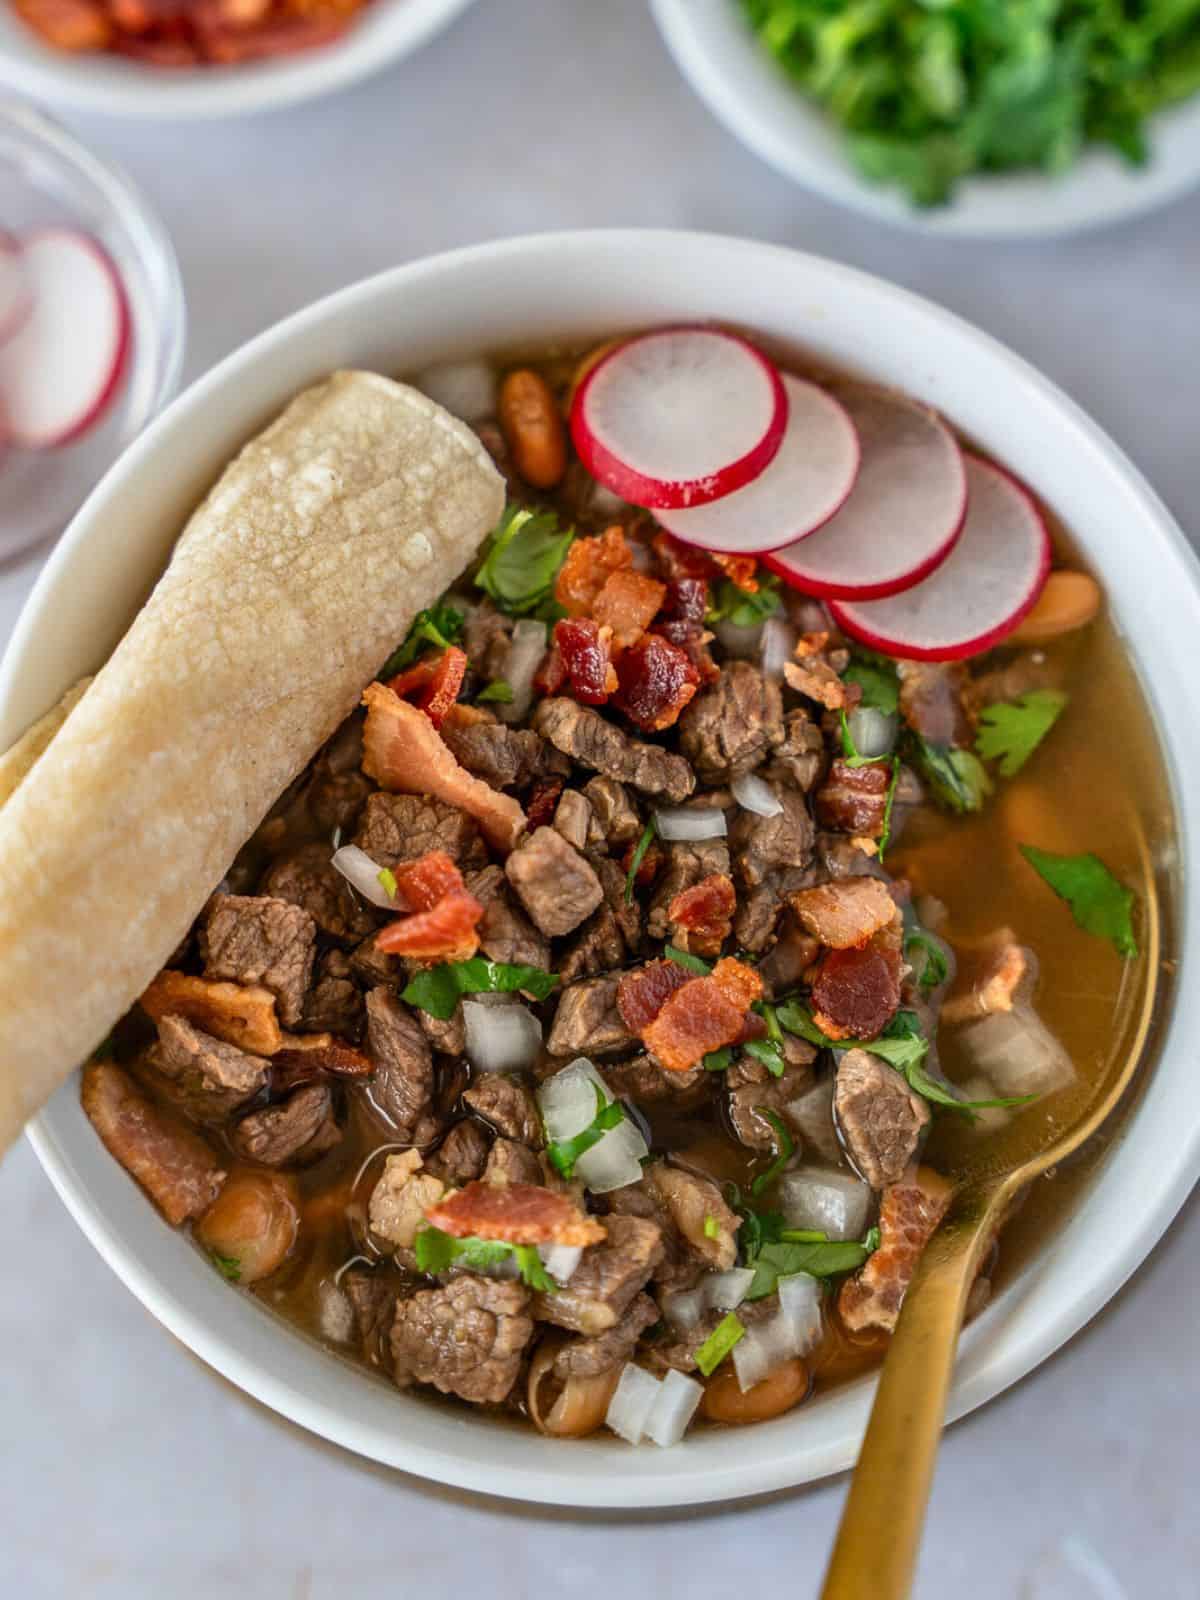 Carne en su jugo in a bowl with a rolled tortilla and sliced radishes.